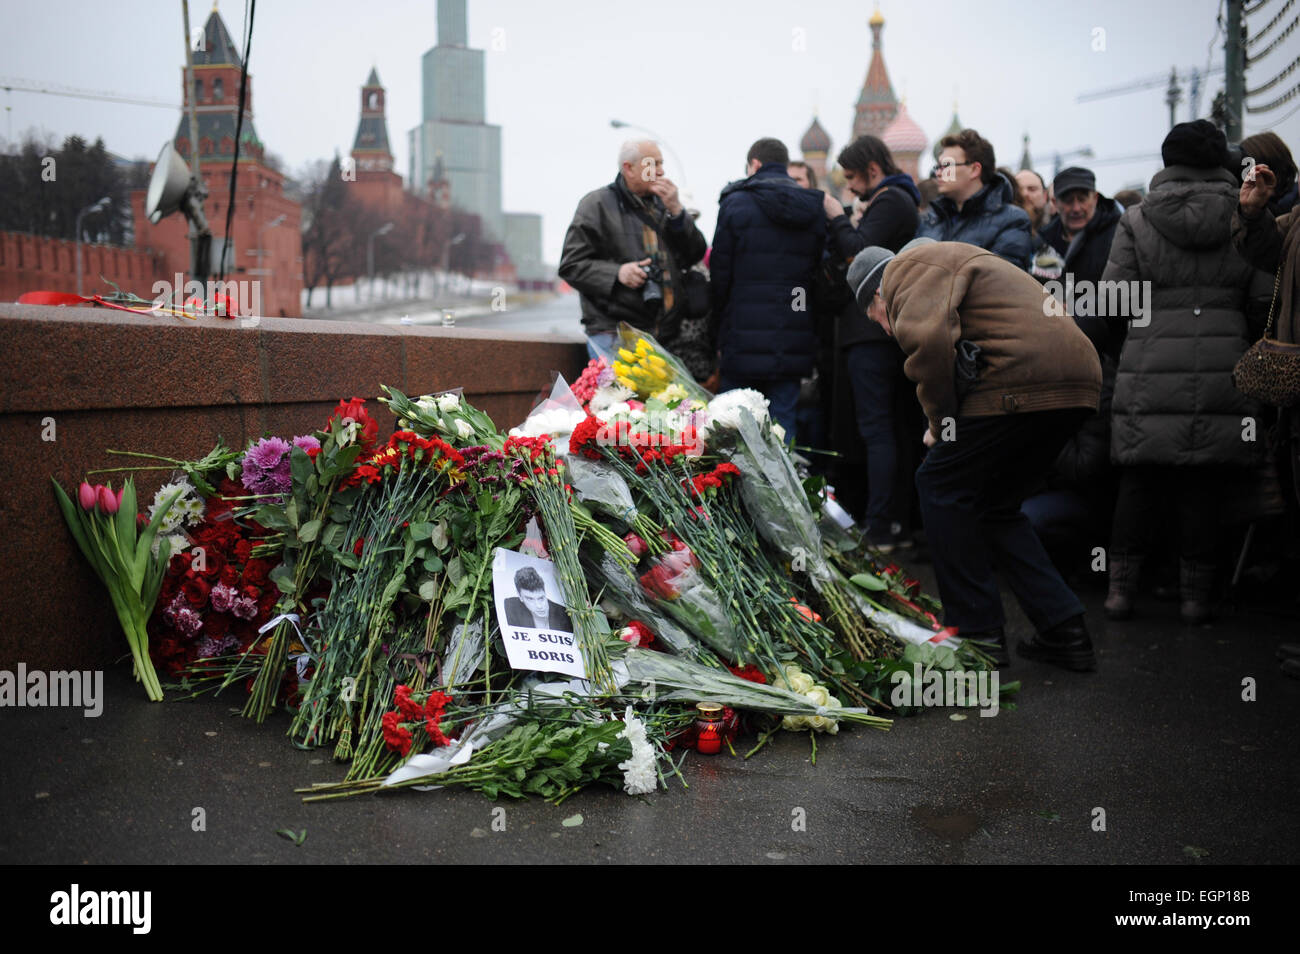 Moscow, Russia. 28th February, 2015. A man lays flowers on the murder site of Russian opposition leader Boris Nemtsov in Moscow, Russia, on Feb. 28, 2015. People came to the murder site of Boris Nemtsov for mourning on Saturday. Boris Nemtsov was shot and killed near the city center on Feb. 27, 2015. Credit:  Dai Tianfang/Xinhua/Alamy Live News Stock Photo